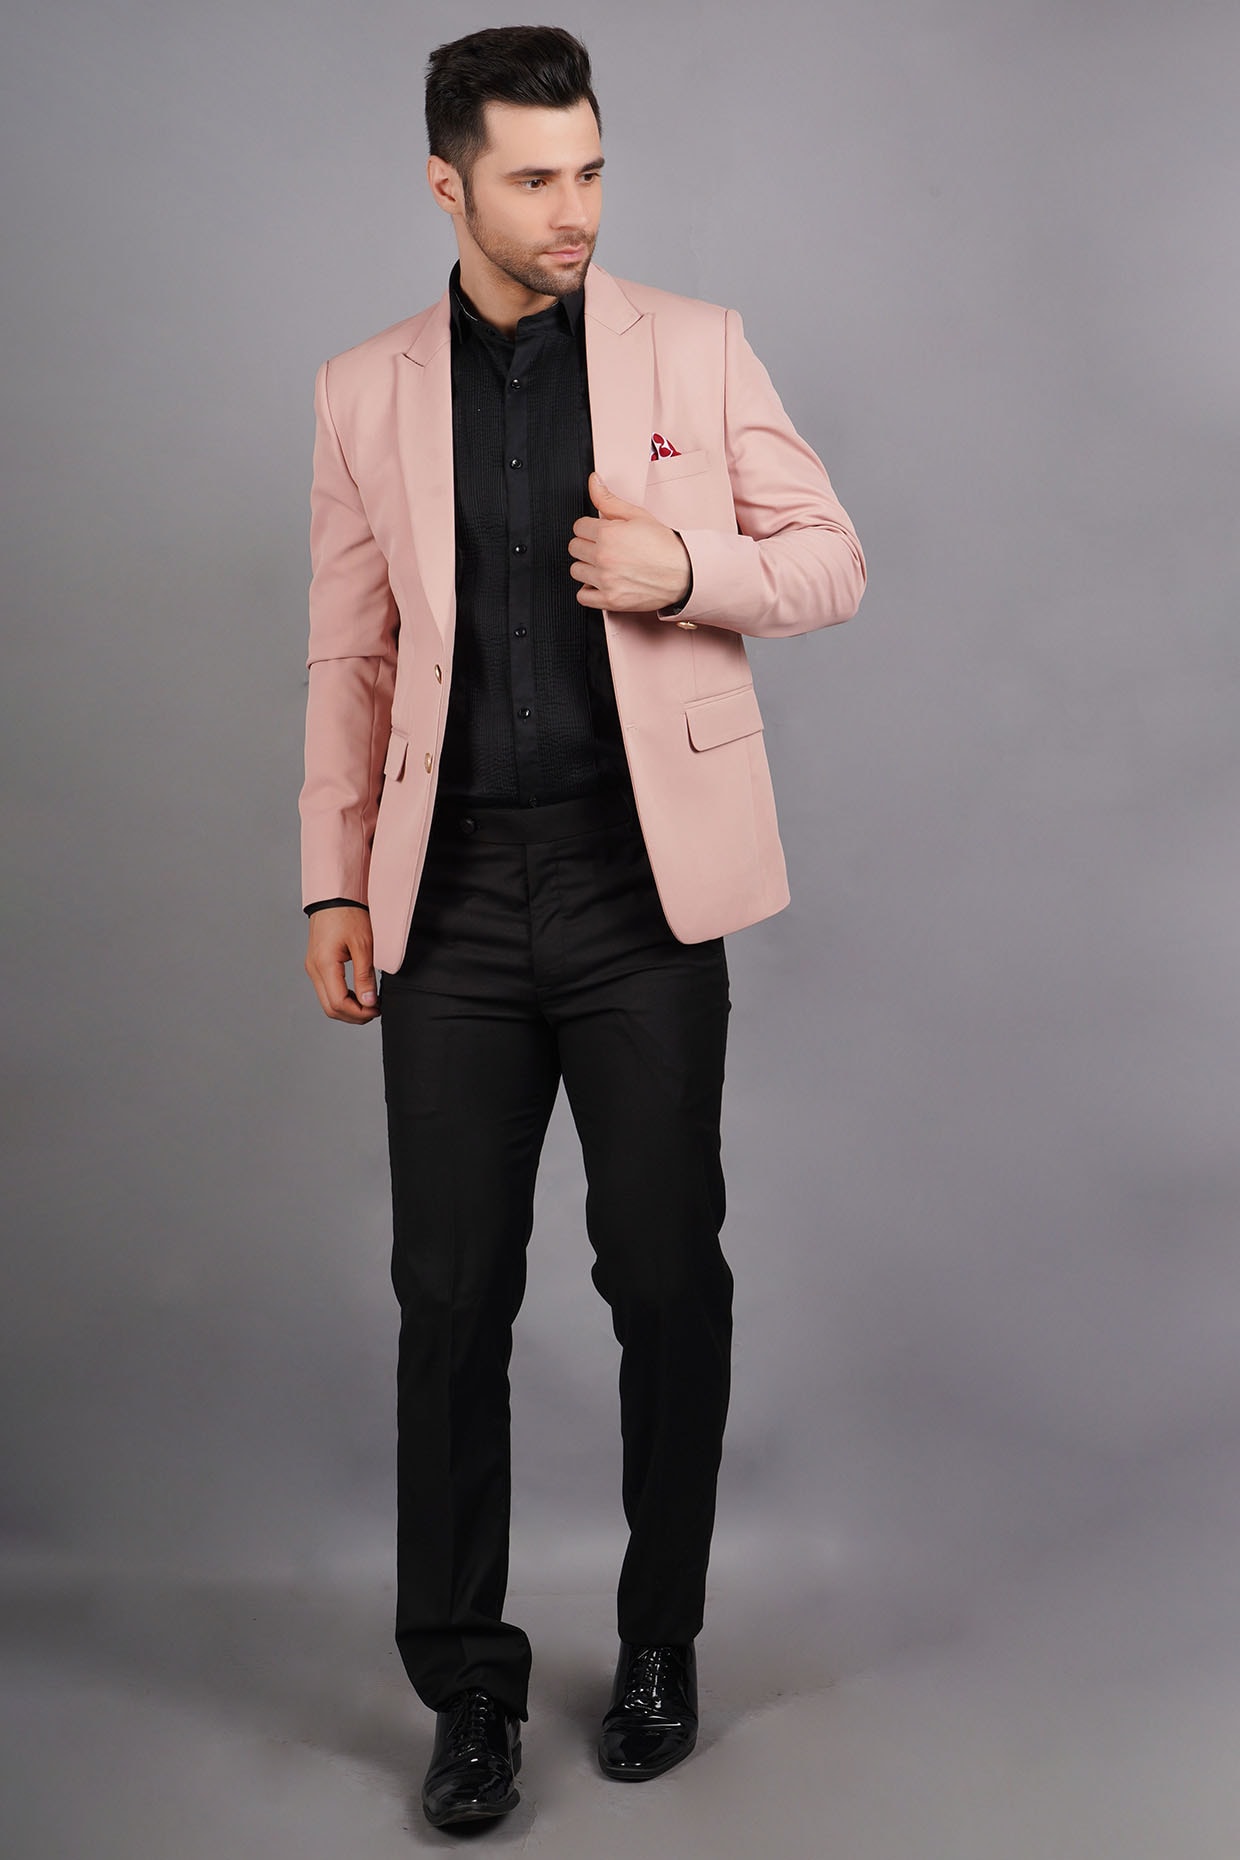 Pink Blazer with Black Shirt Outfits For Men (6 ideas & outfits) | Lookastic